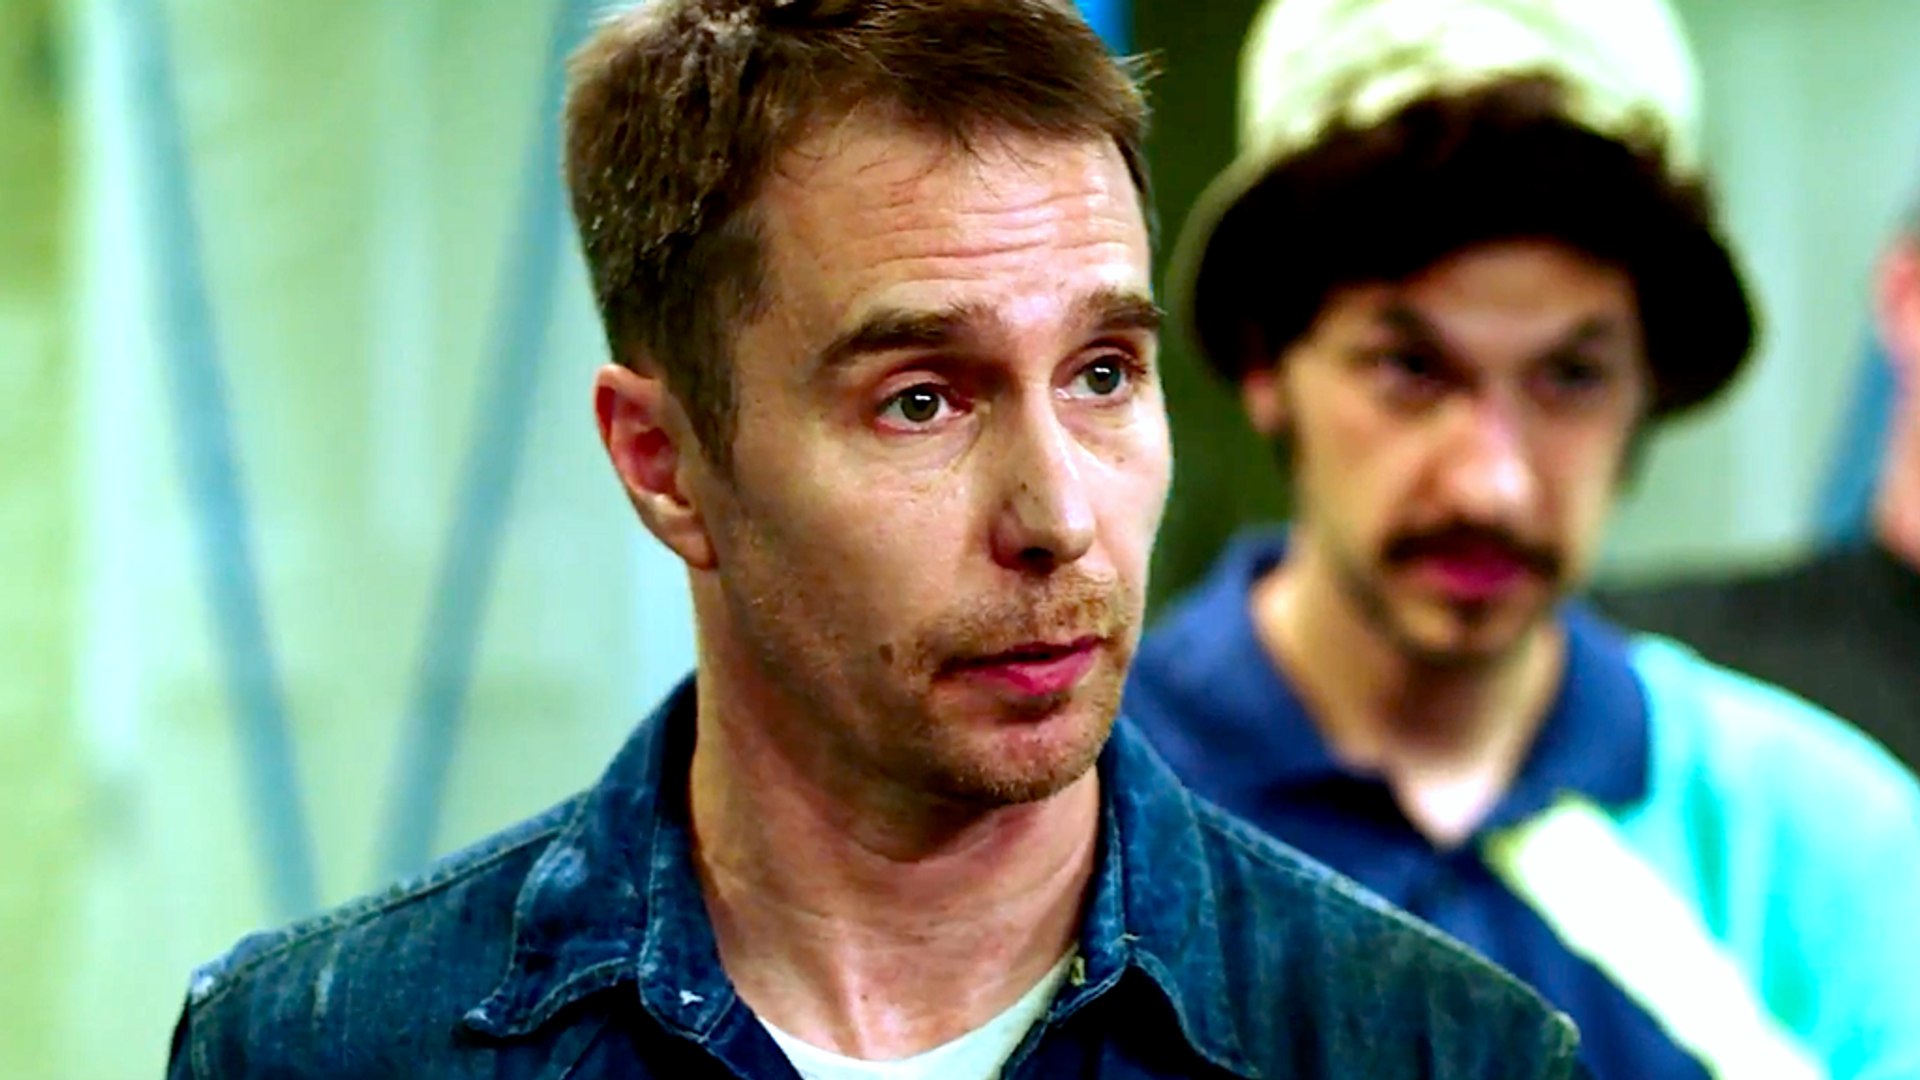 Blue Iguana with Sam Rockwell - Official Trailer